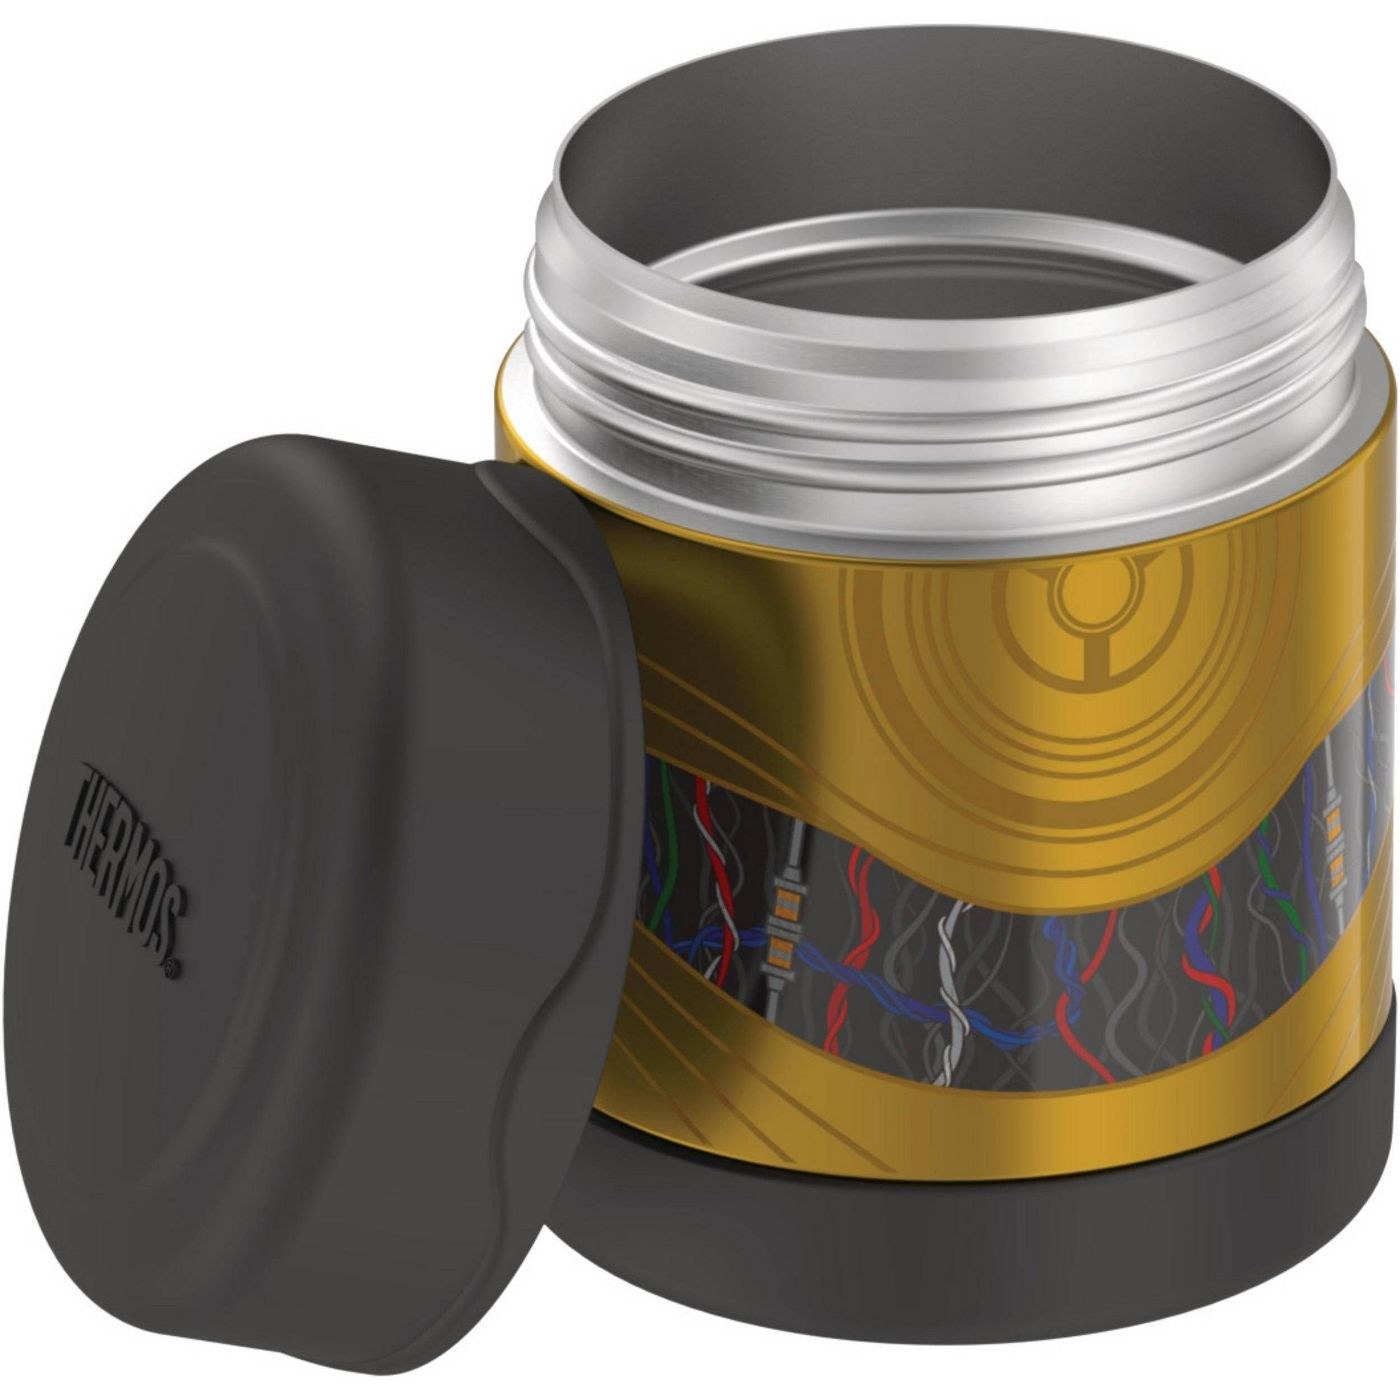 The squat, wide, cylindrical thermos, with a C-3PO design on the outside and screw-off cap